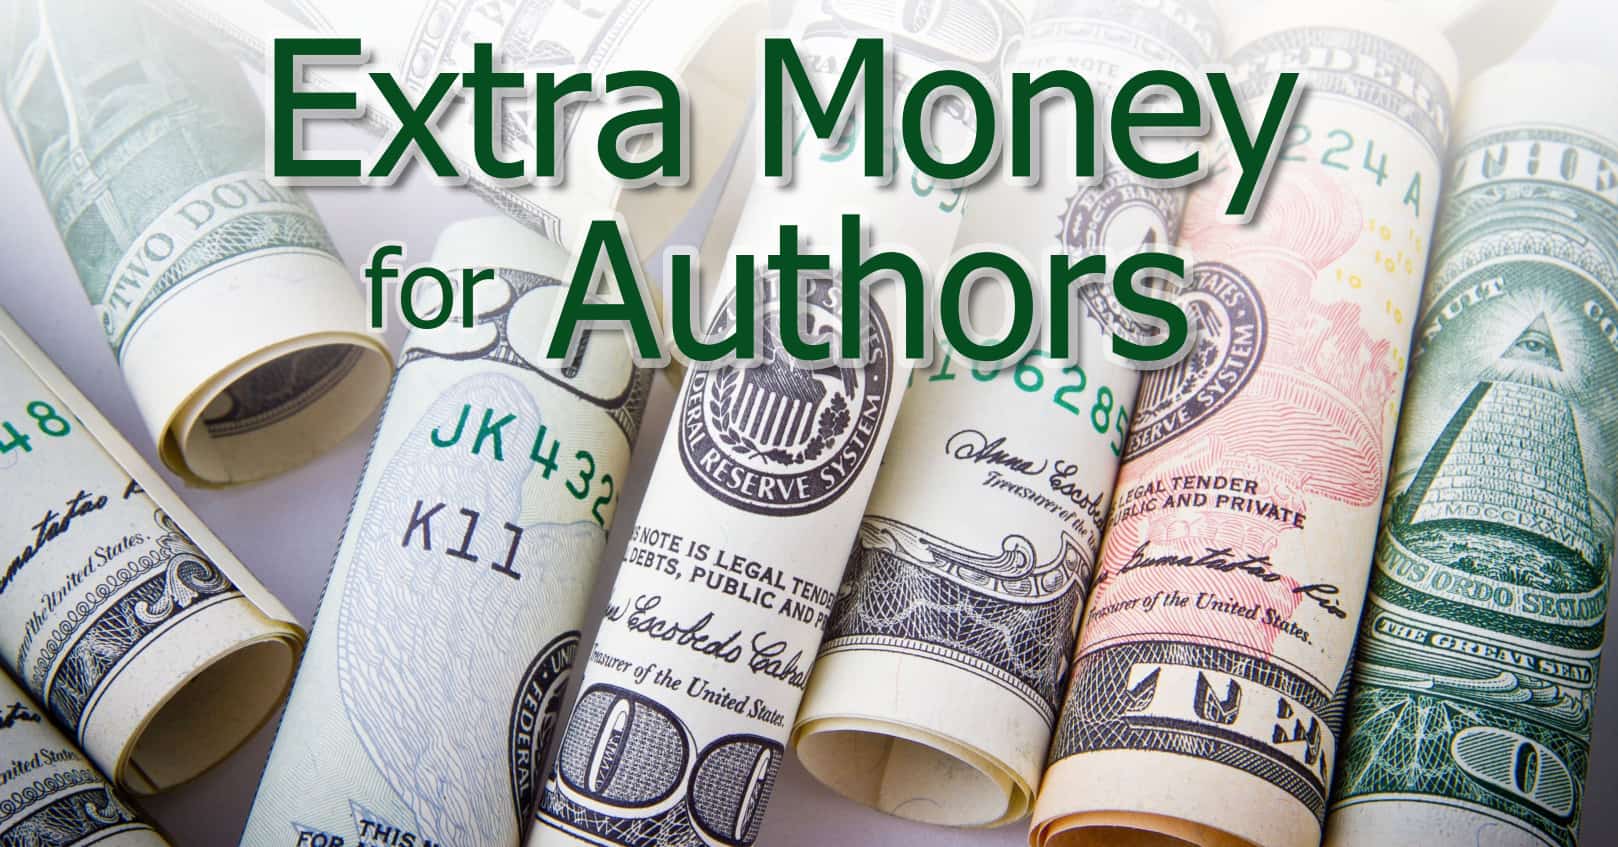 Extra Money for Authors: Designing and Offering Book Products to Readers